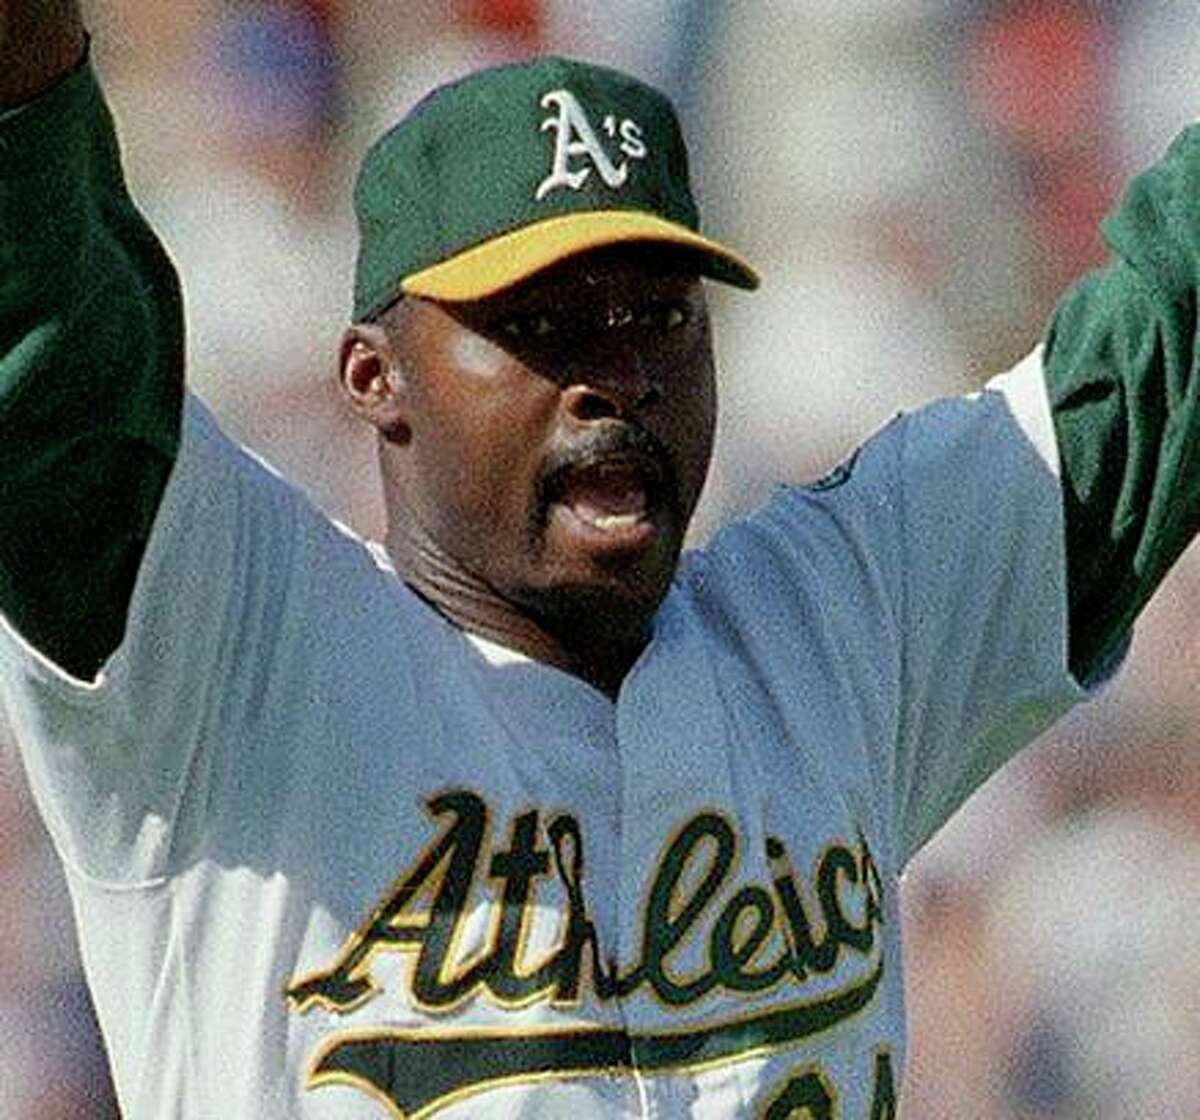 Oakland native Dave Stewart had four straight 20-win seasons with the A’s.